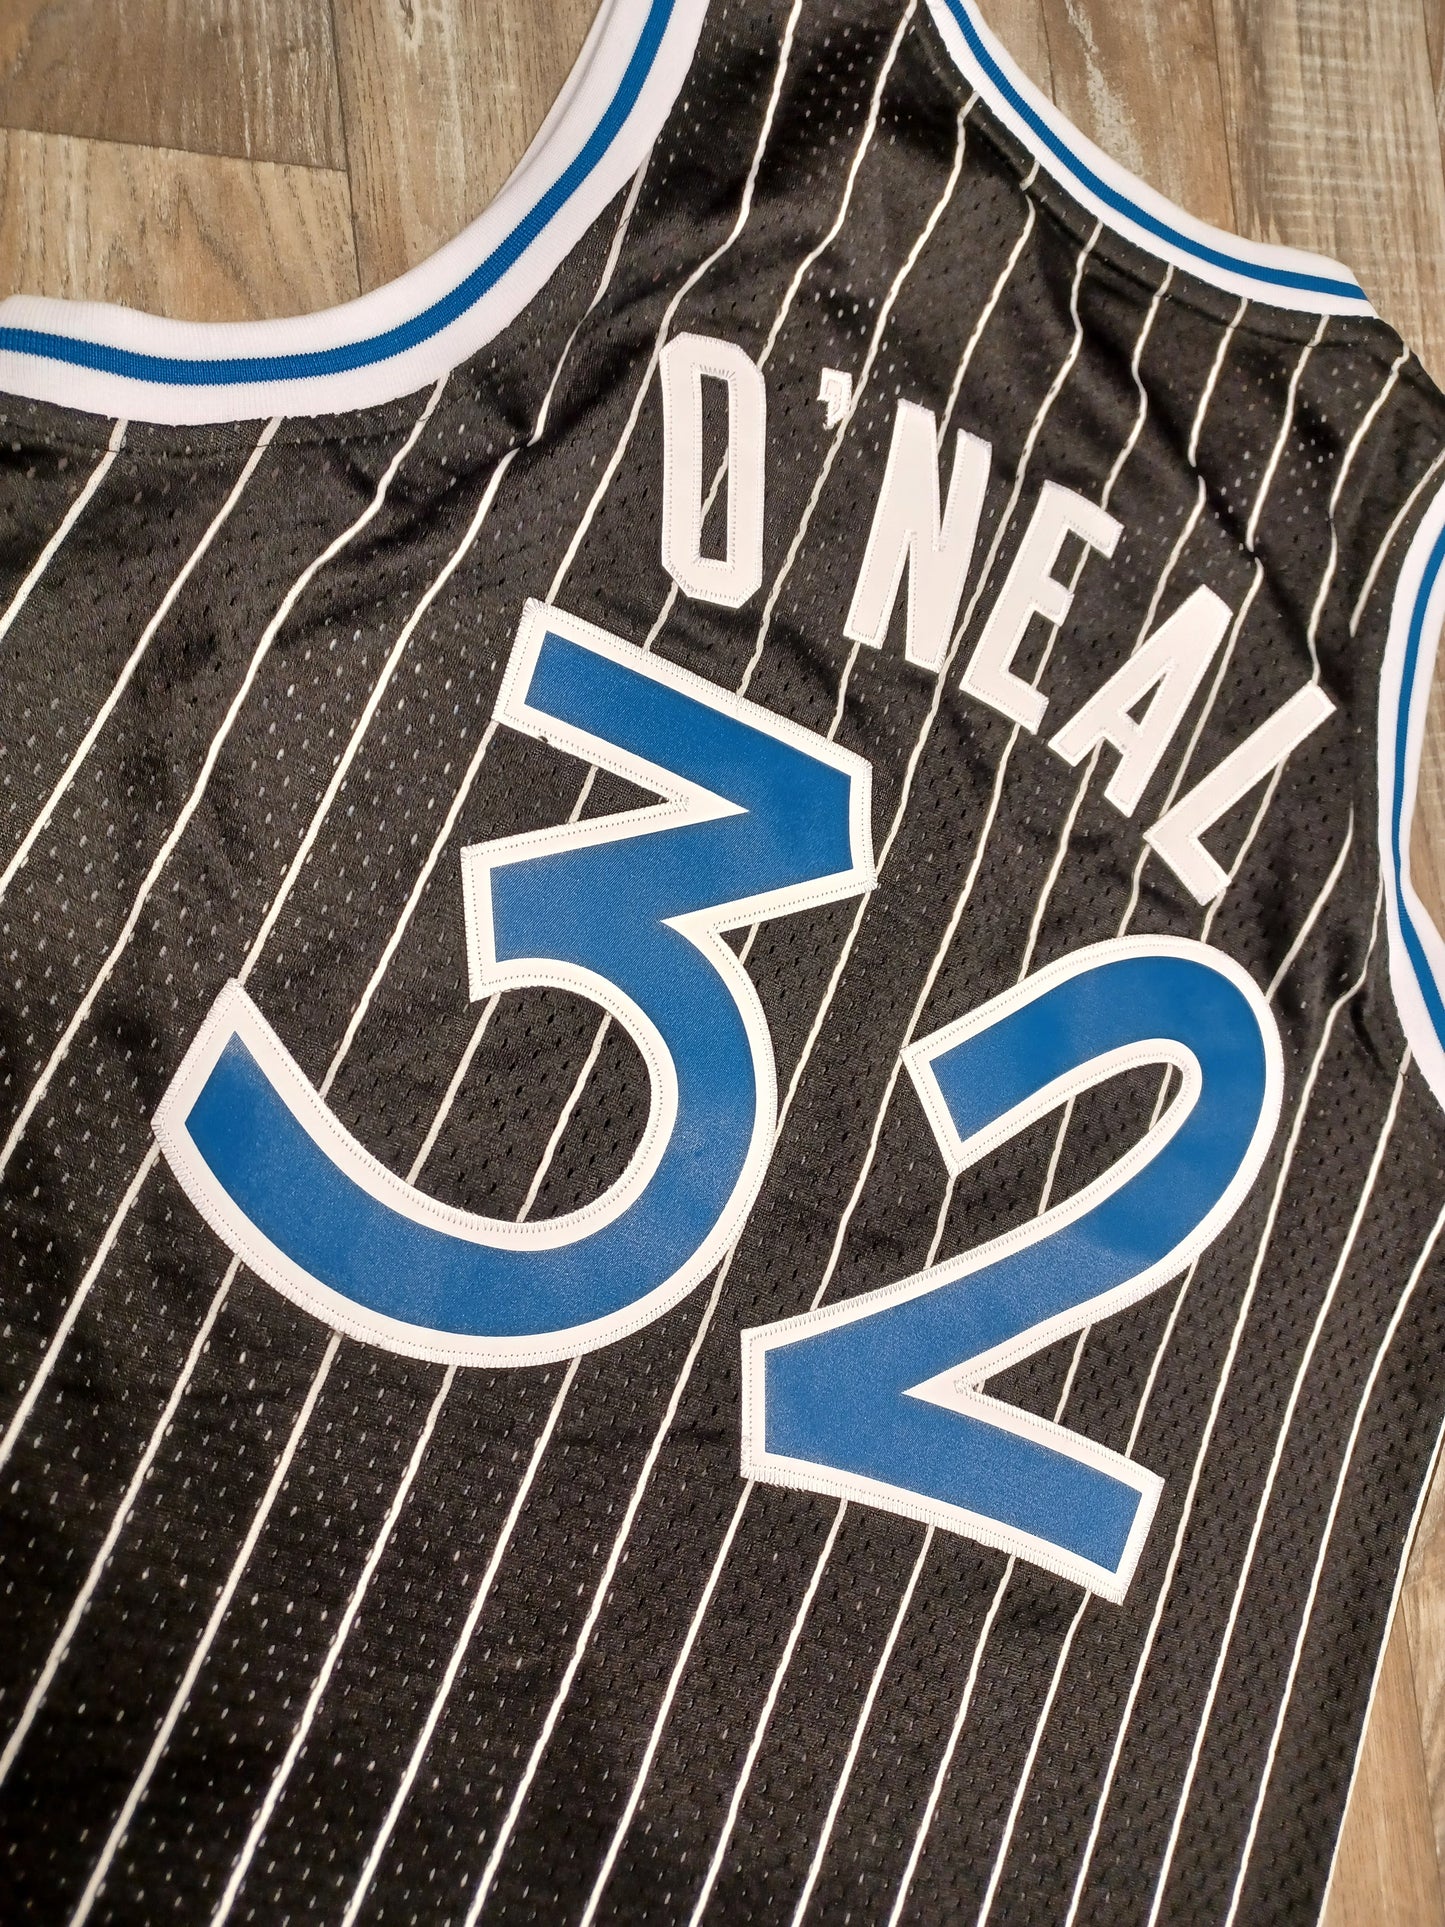 Shaquille O'Neal Orlando Magic Jersey Size Small